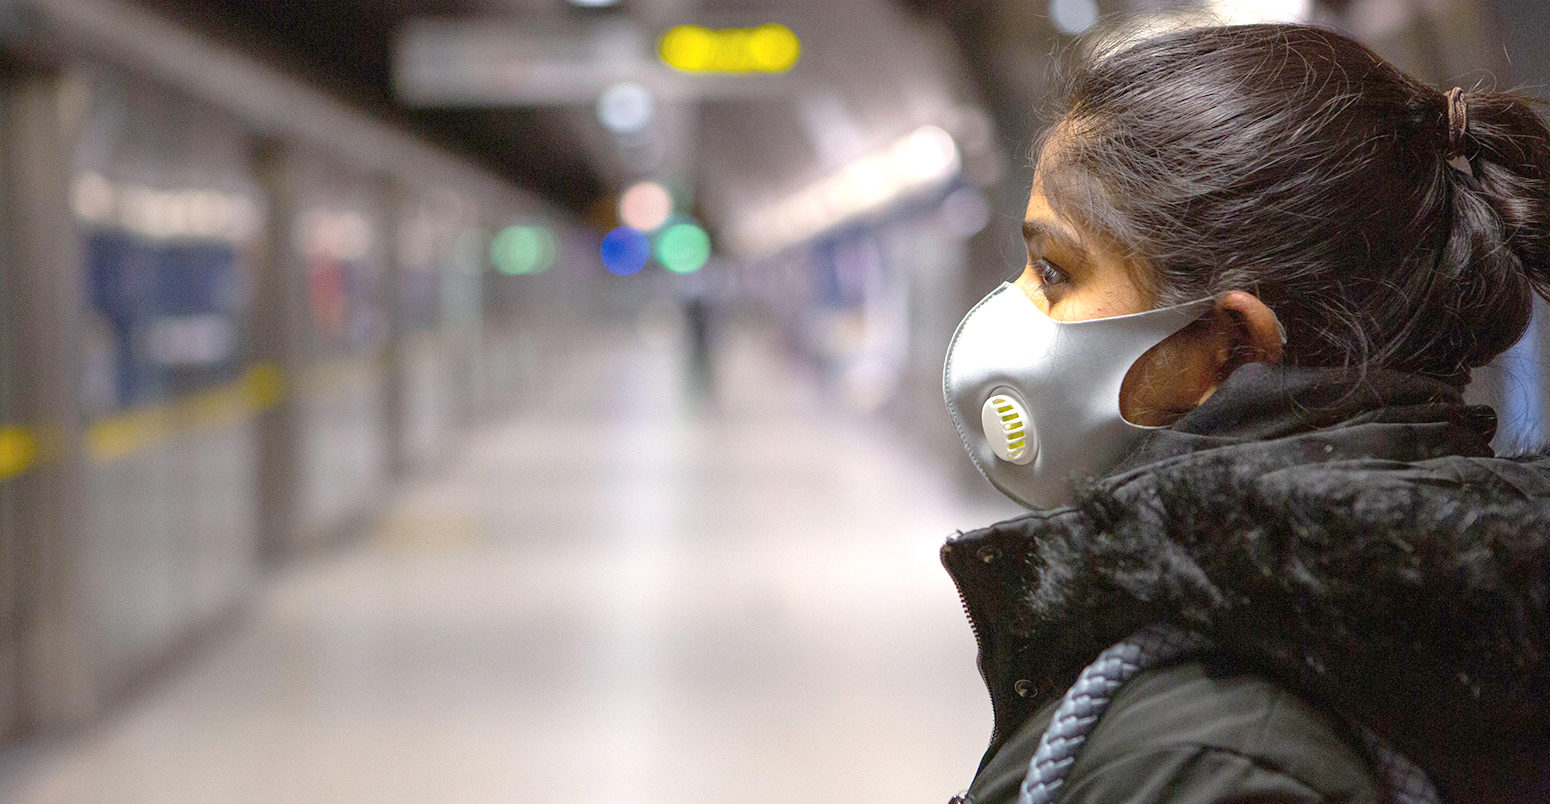 Commuters wearing face masks on the London Underground travelling during the COVID-19 outbreak, March 2020. Credit: Transport for London / Alamy Stock Photo. 2BB5C5Y